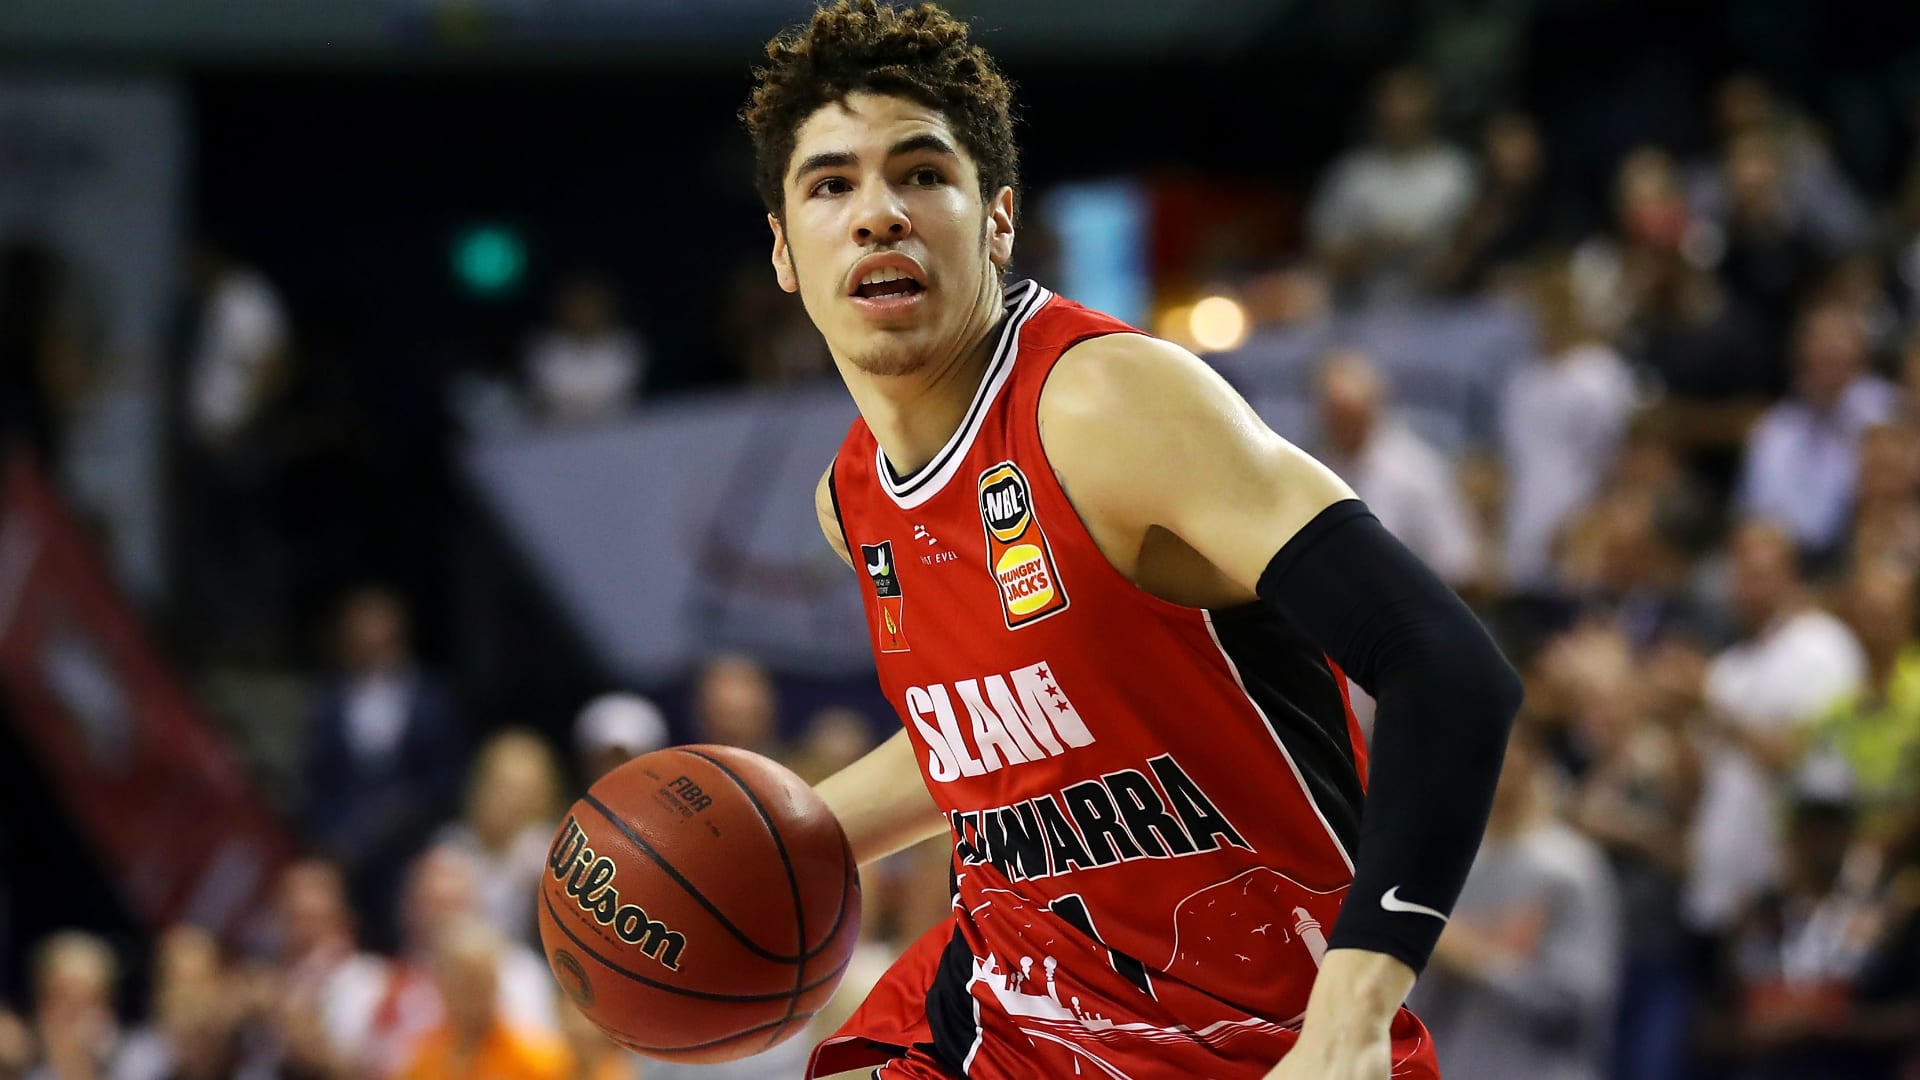 Sale of Australian NBL Team to LaMelo Ball and Manager Not a Done Deal